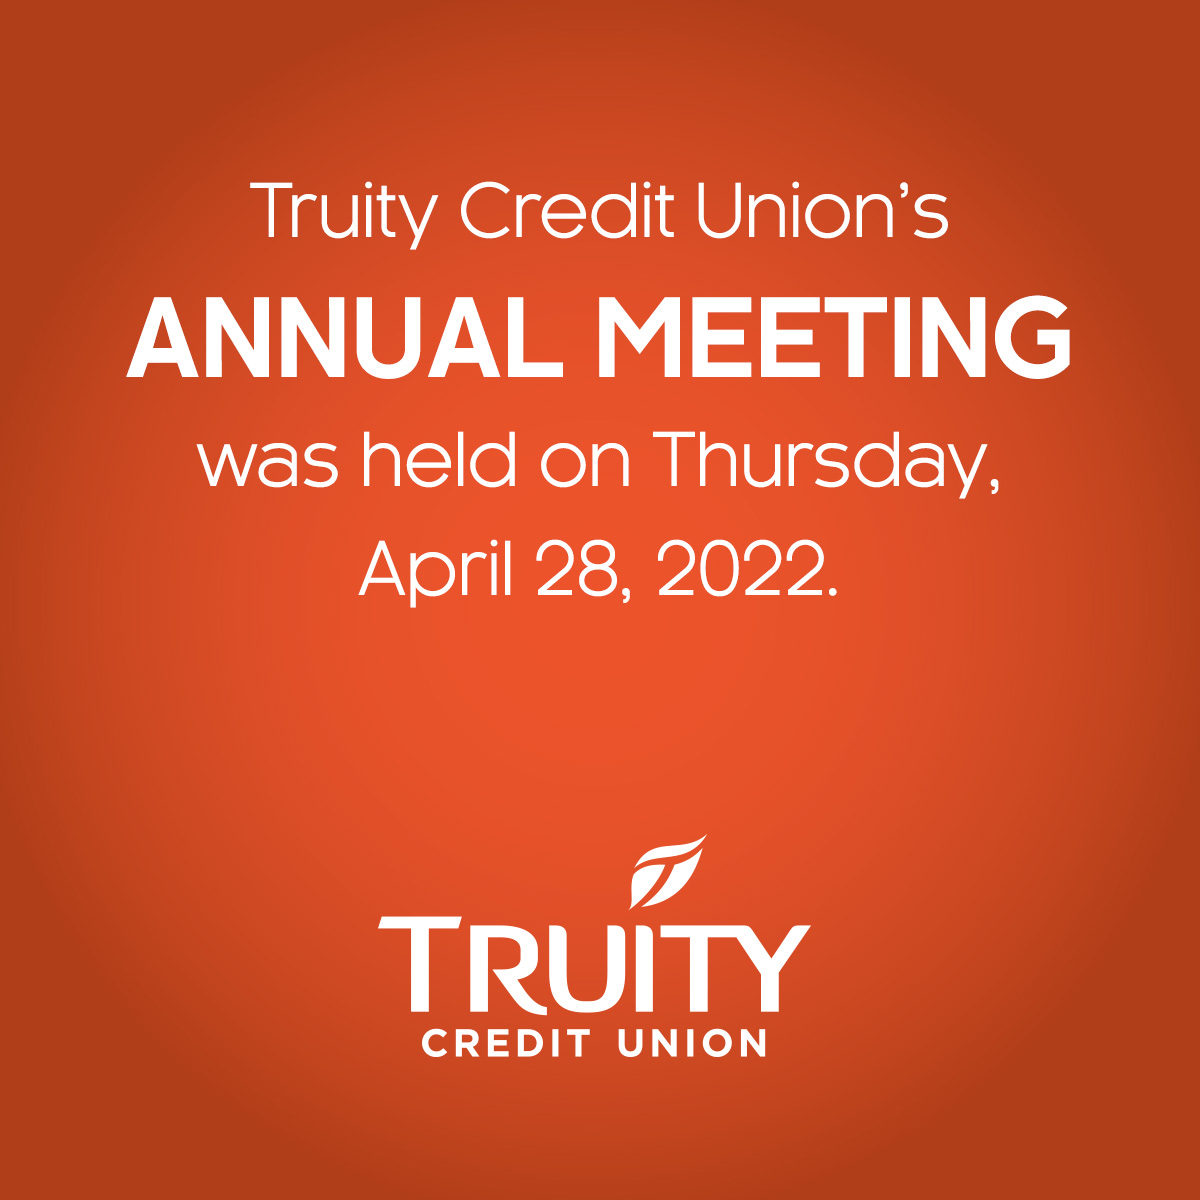 Truity Credit Union will hold 83rd Annual Meeting